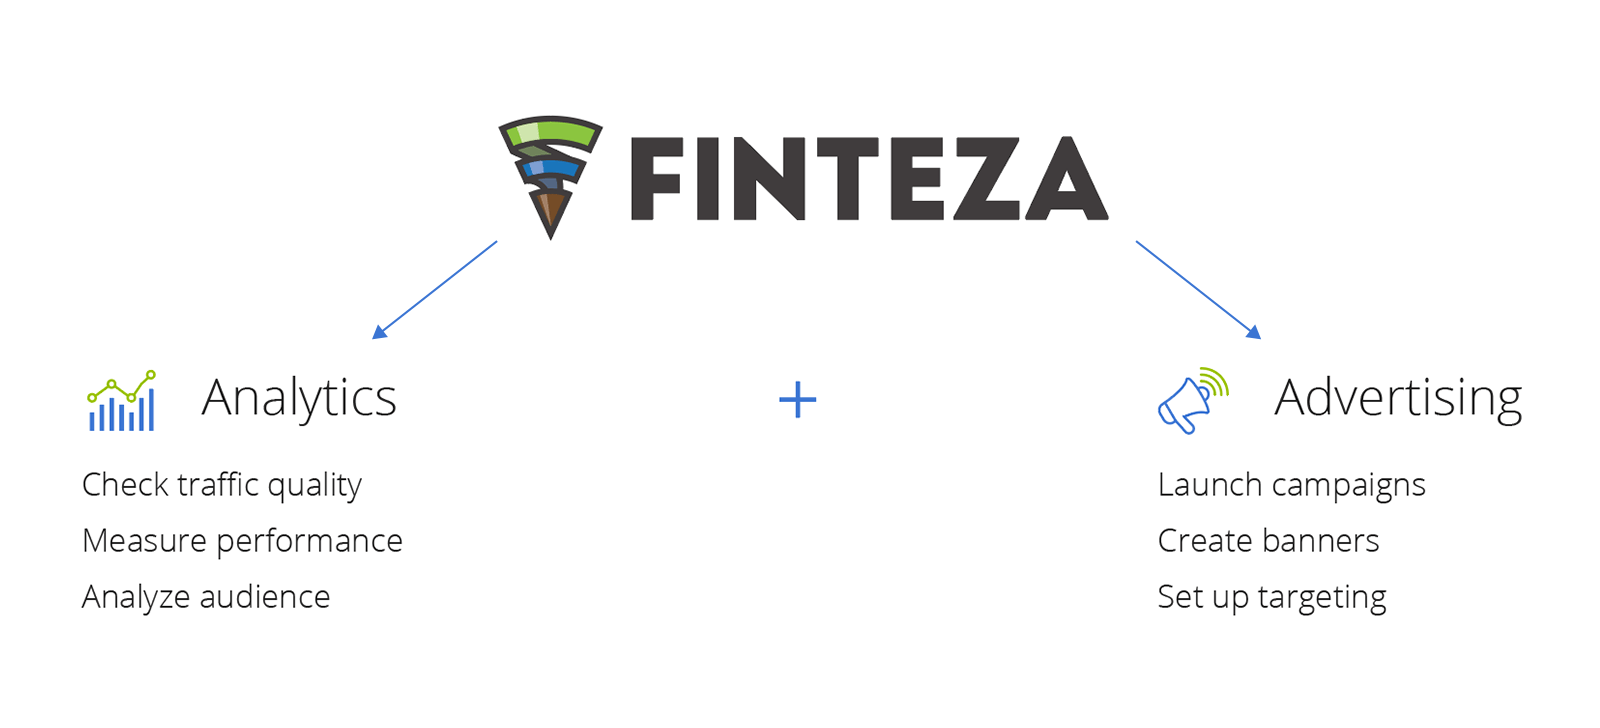 Finteza is an analytical service + advertising engine